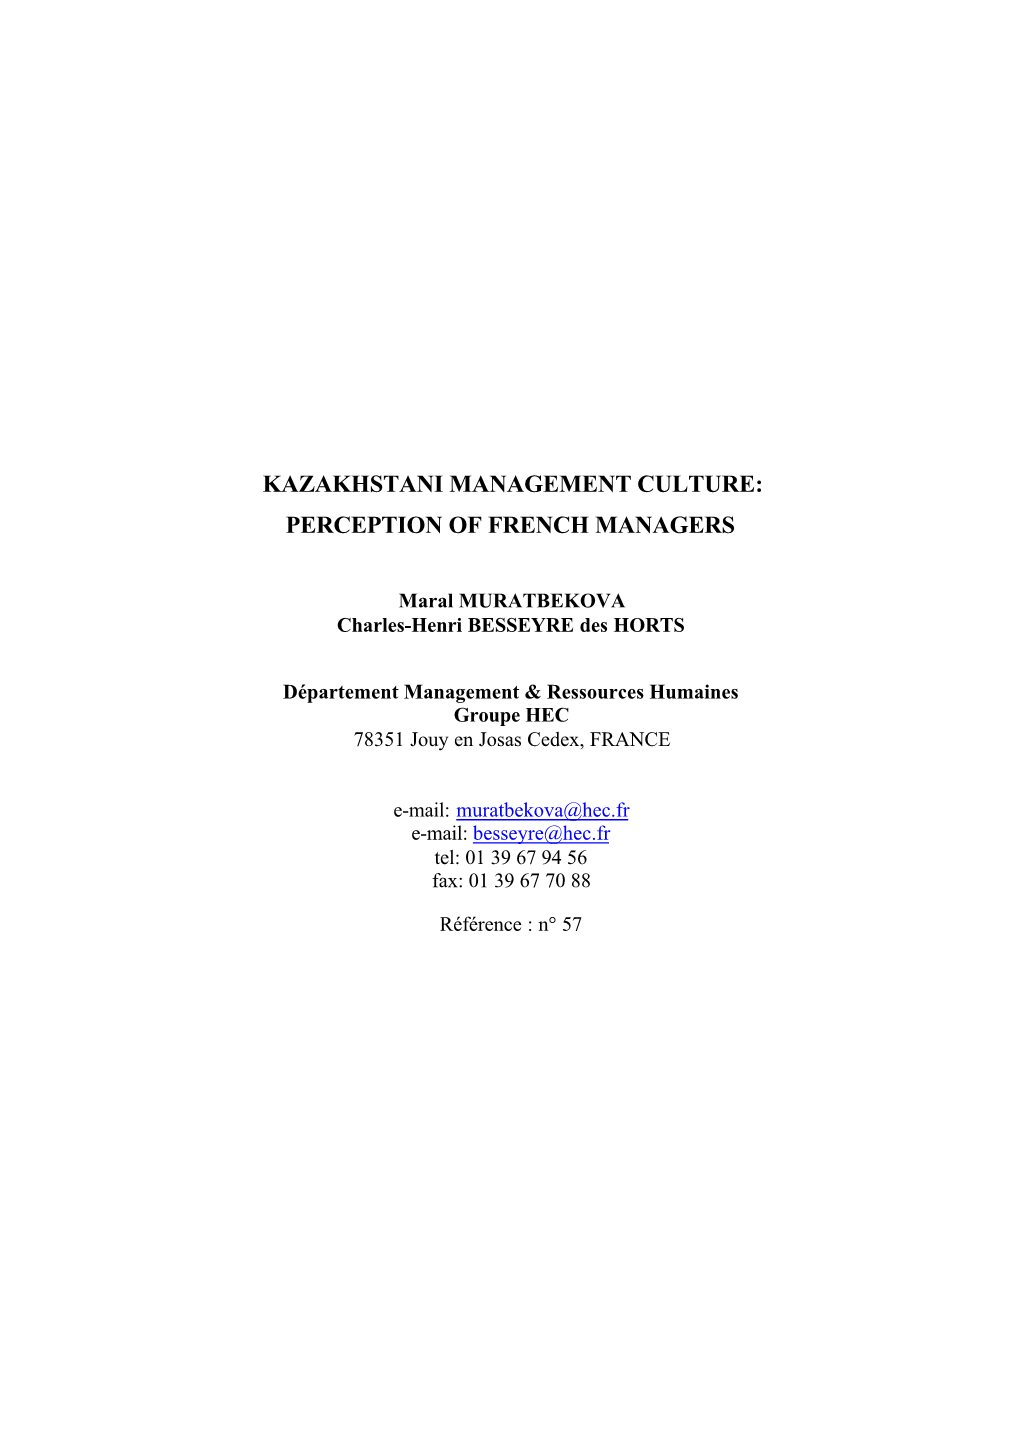 Kazakhstani Management Culture: Perception of French Managers